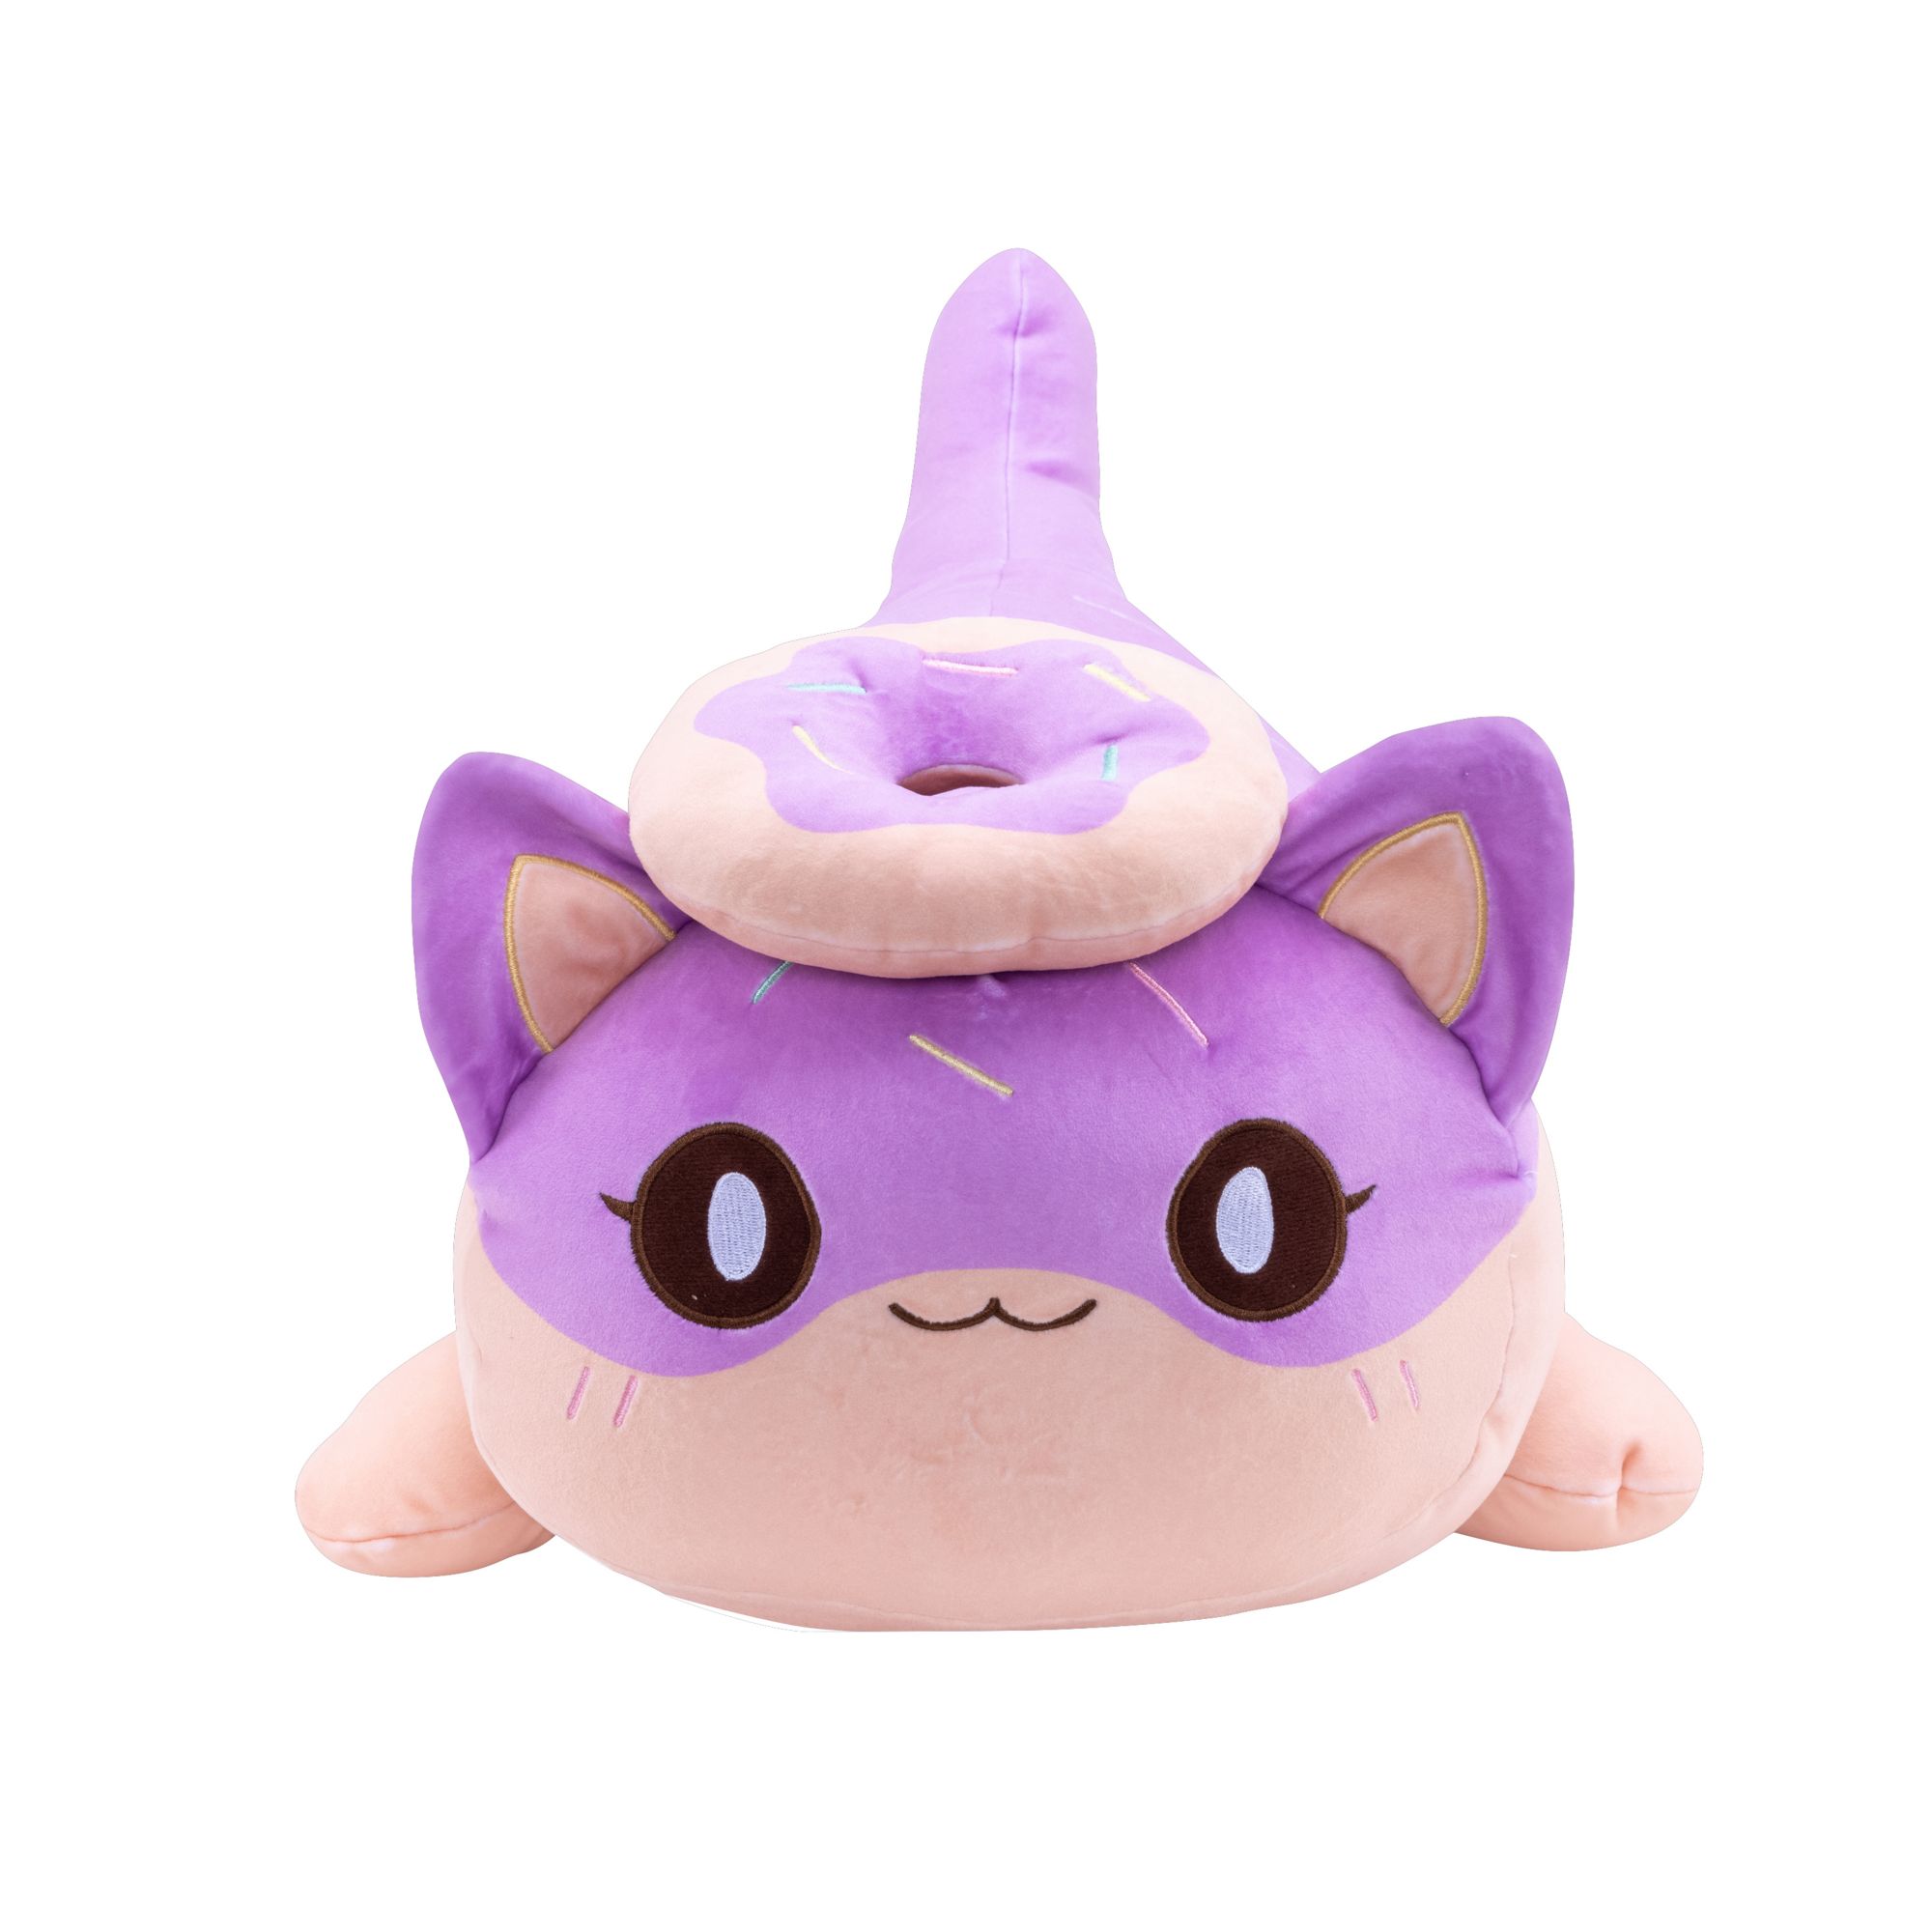 Question about plushies that appear in gift shops/free stands in